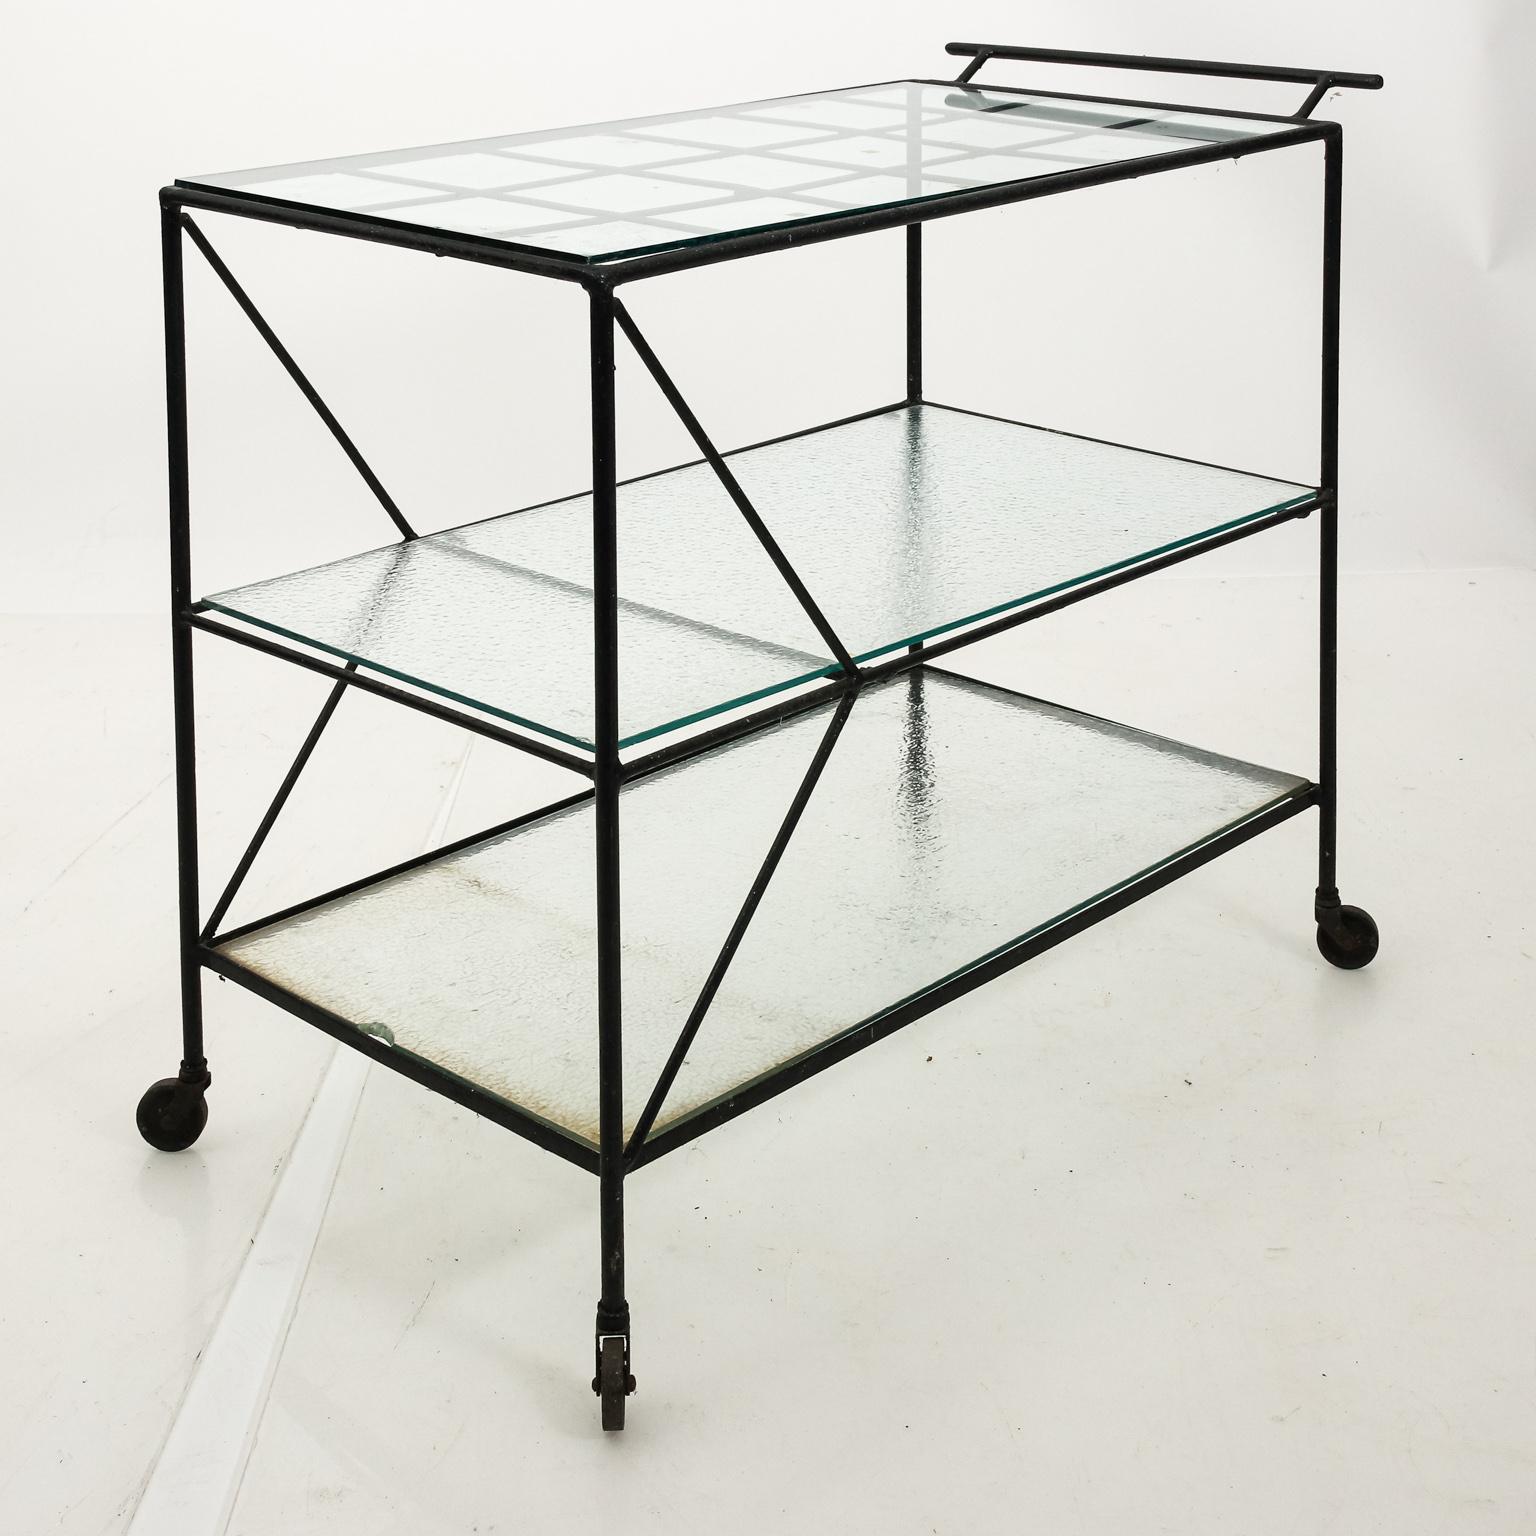 Metal garden or outdoor bar cart by Russell Woodard in the style of Sculptura with glass top. The piece also features three open shelves with one small enclosed shelf.